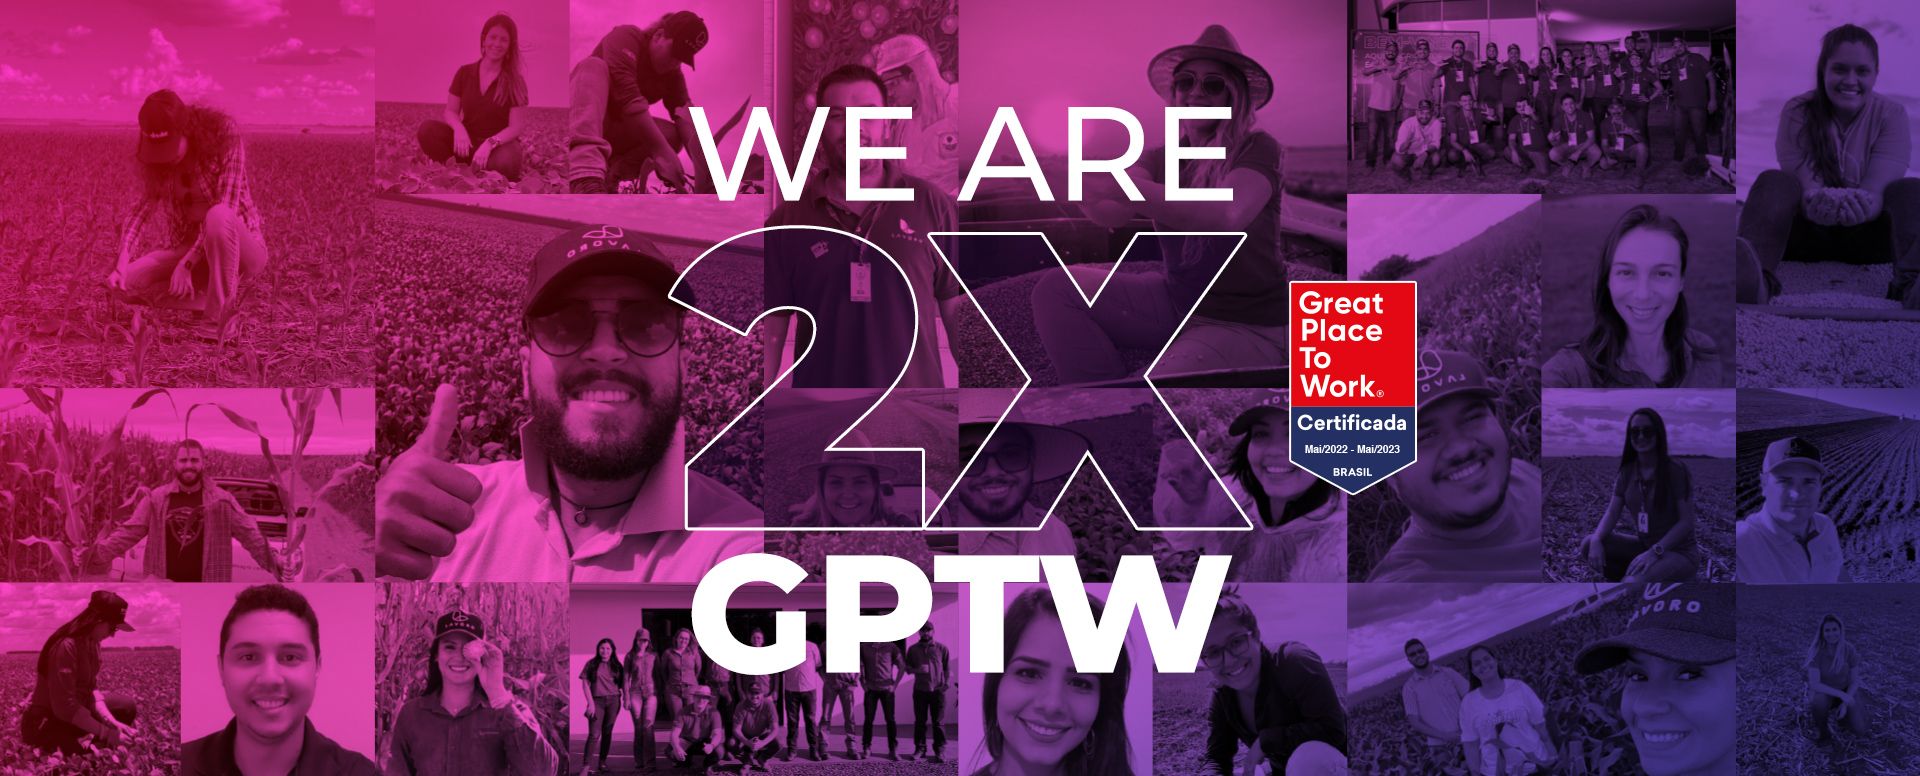 We are 2x GPTW